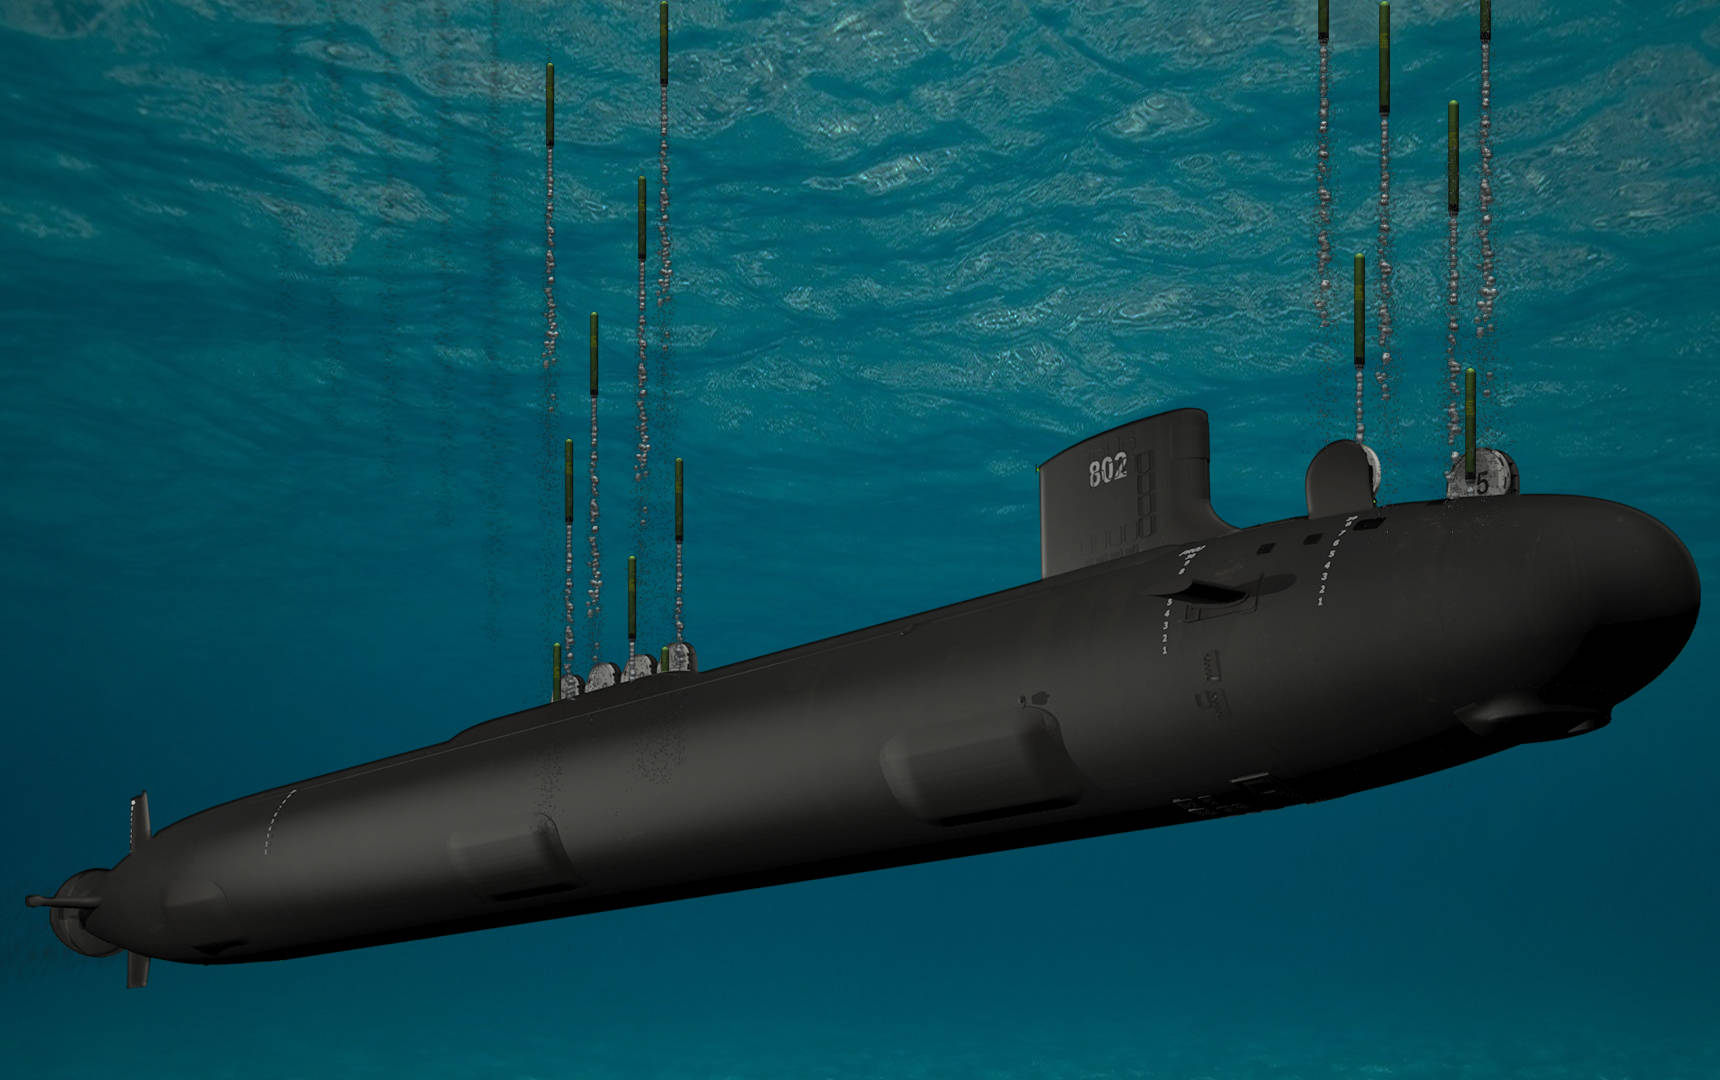 General Dynamics Electric Boat Awarded $22.2 Billion by U.S. Navy for Fifth Block of Virginia-Class Submarines